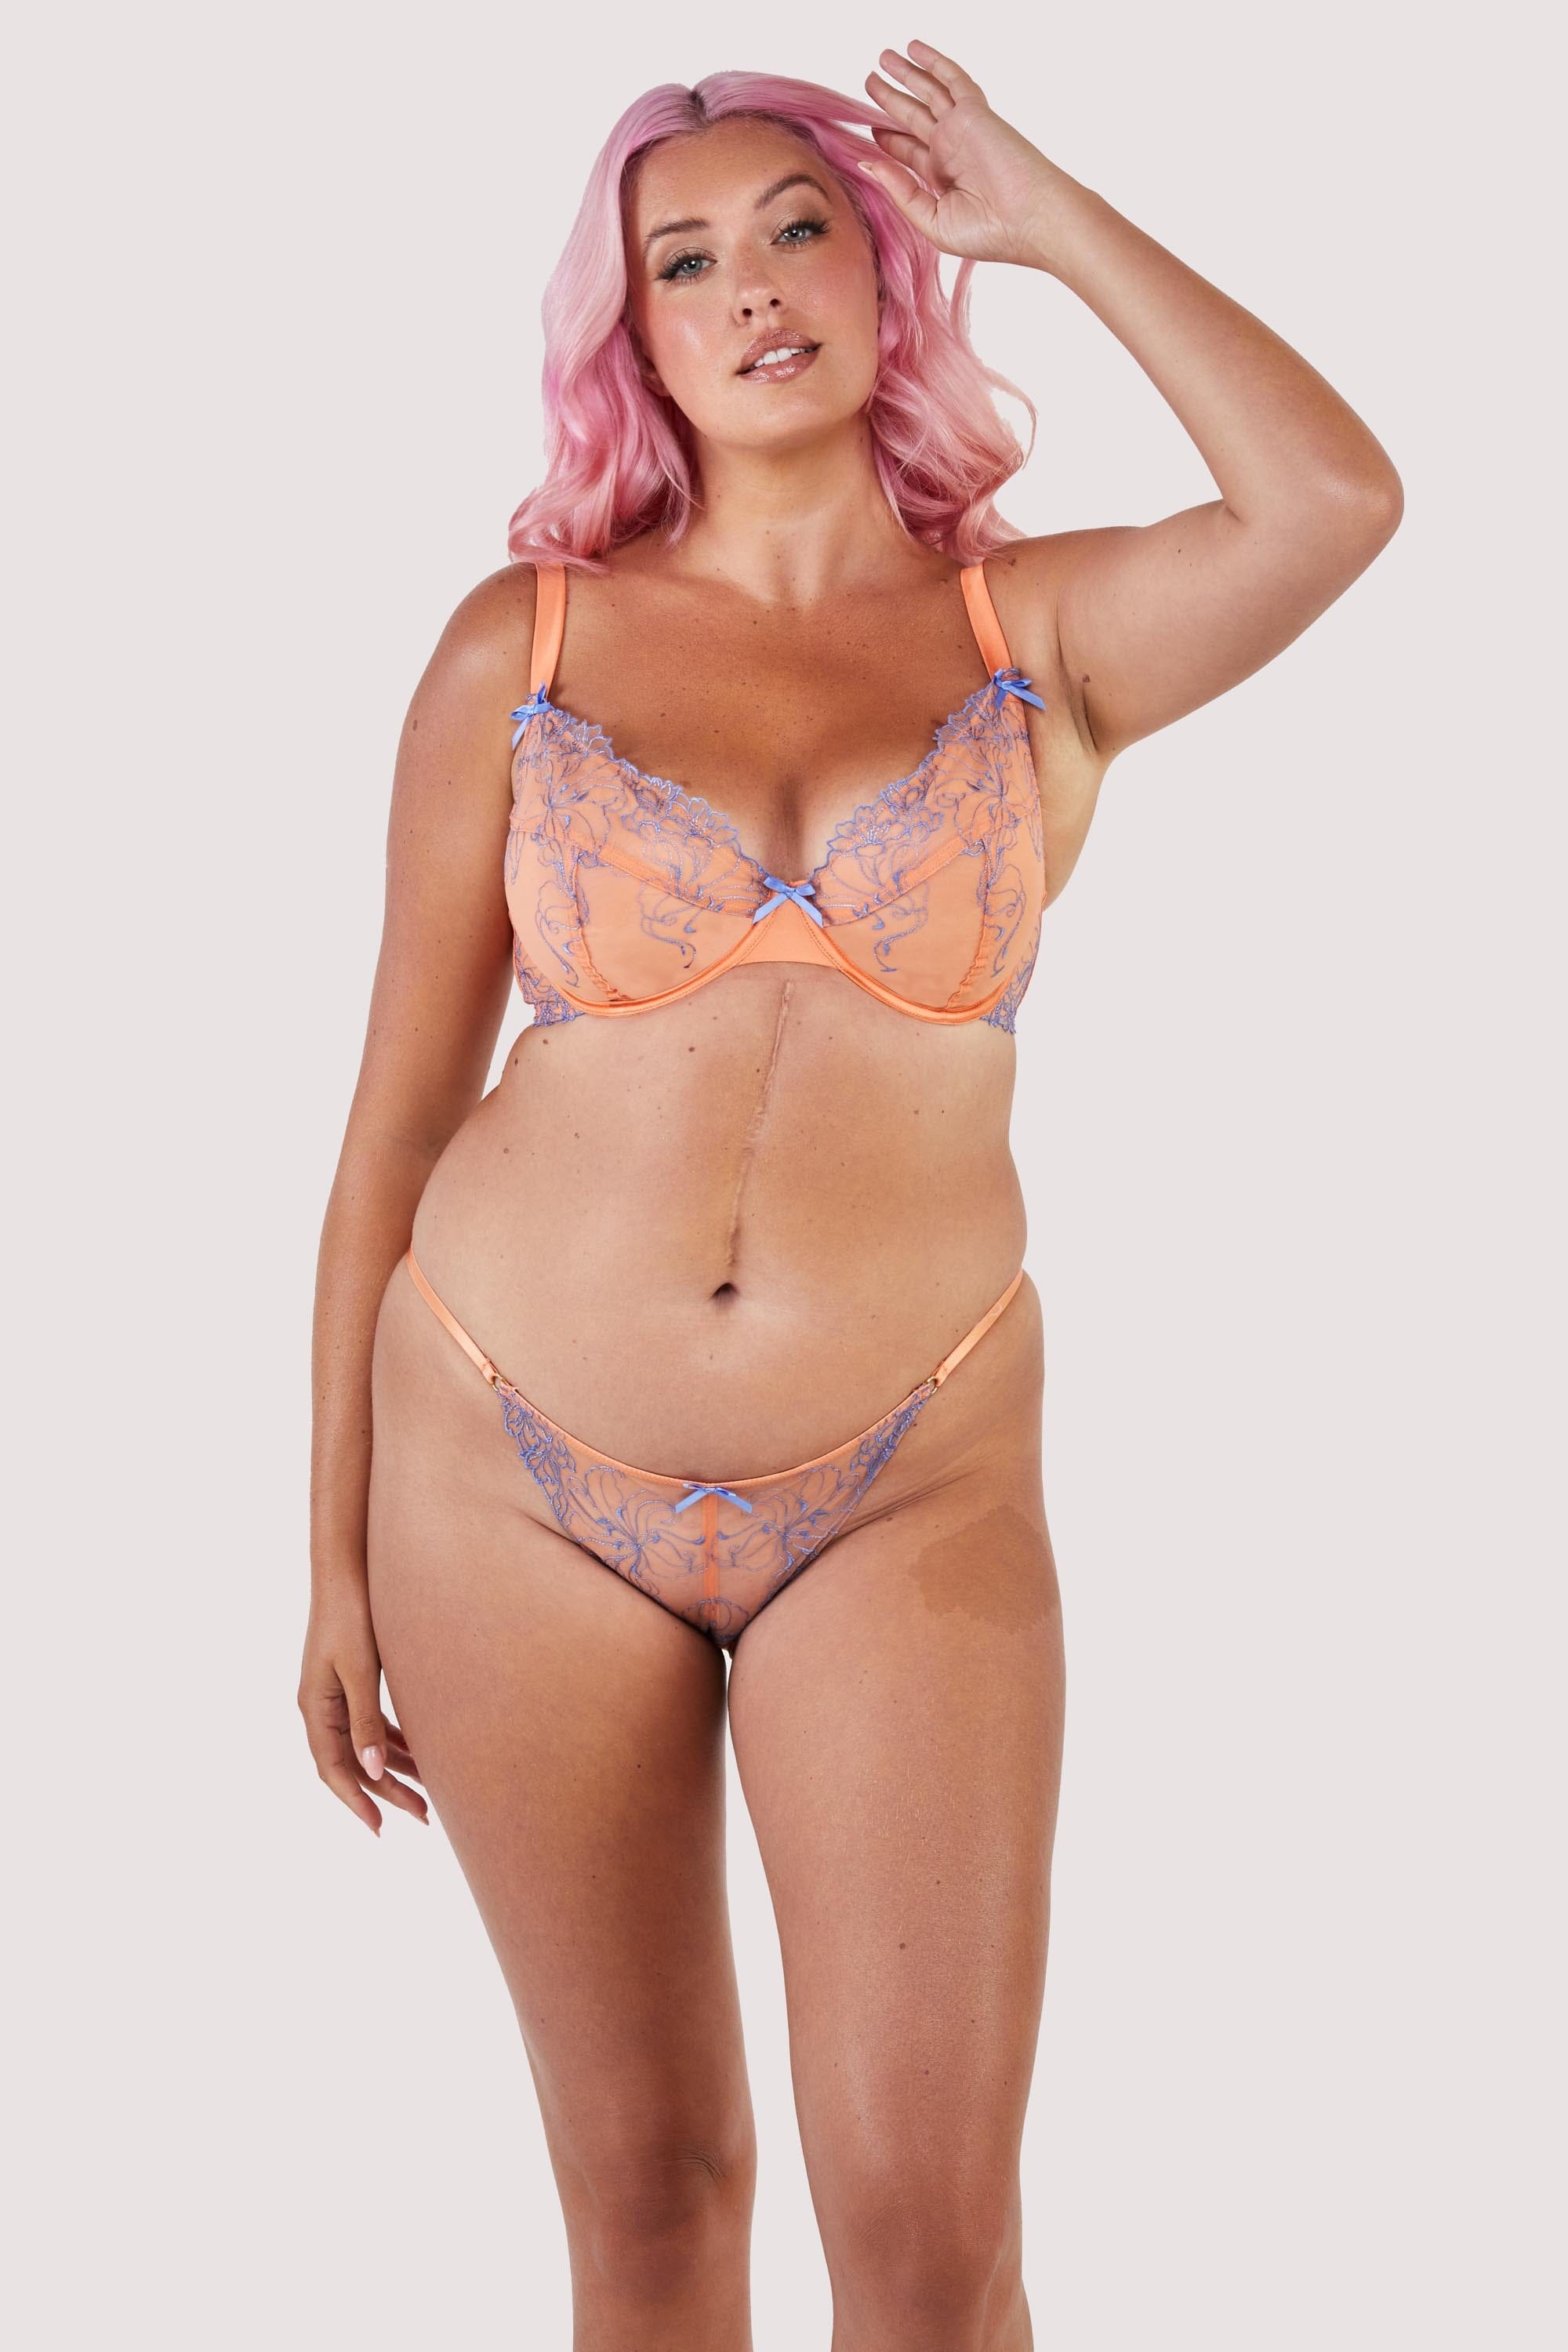 Orange mesh bra with blue-lilac embroidery and bows, with matching tanga brief.